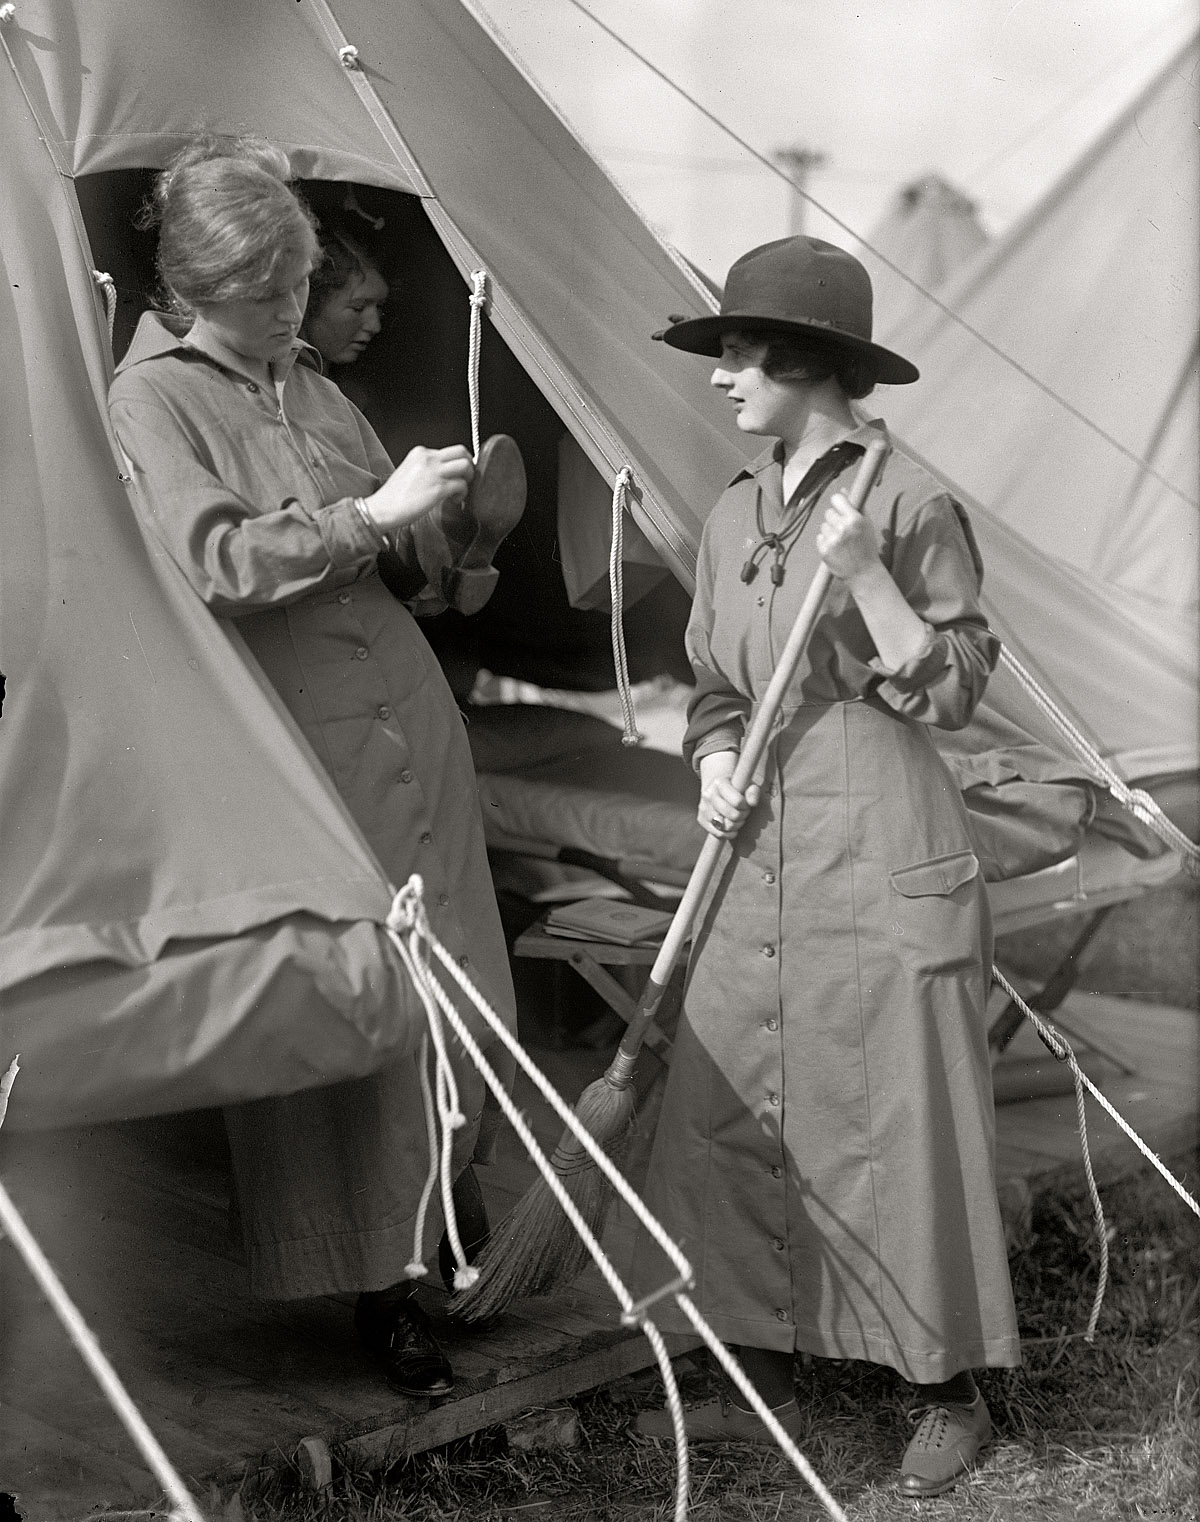 1916. "Woman's National Service School, under woman's section, Navy League. Mrs. Slater and Miss Moore." Harris & Ewing glass negative. View full size.